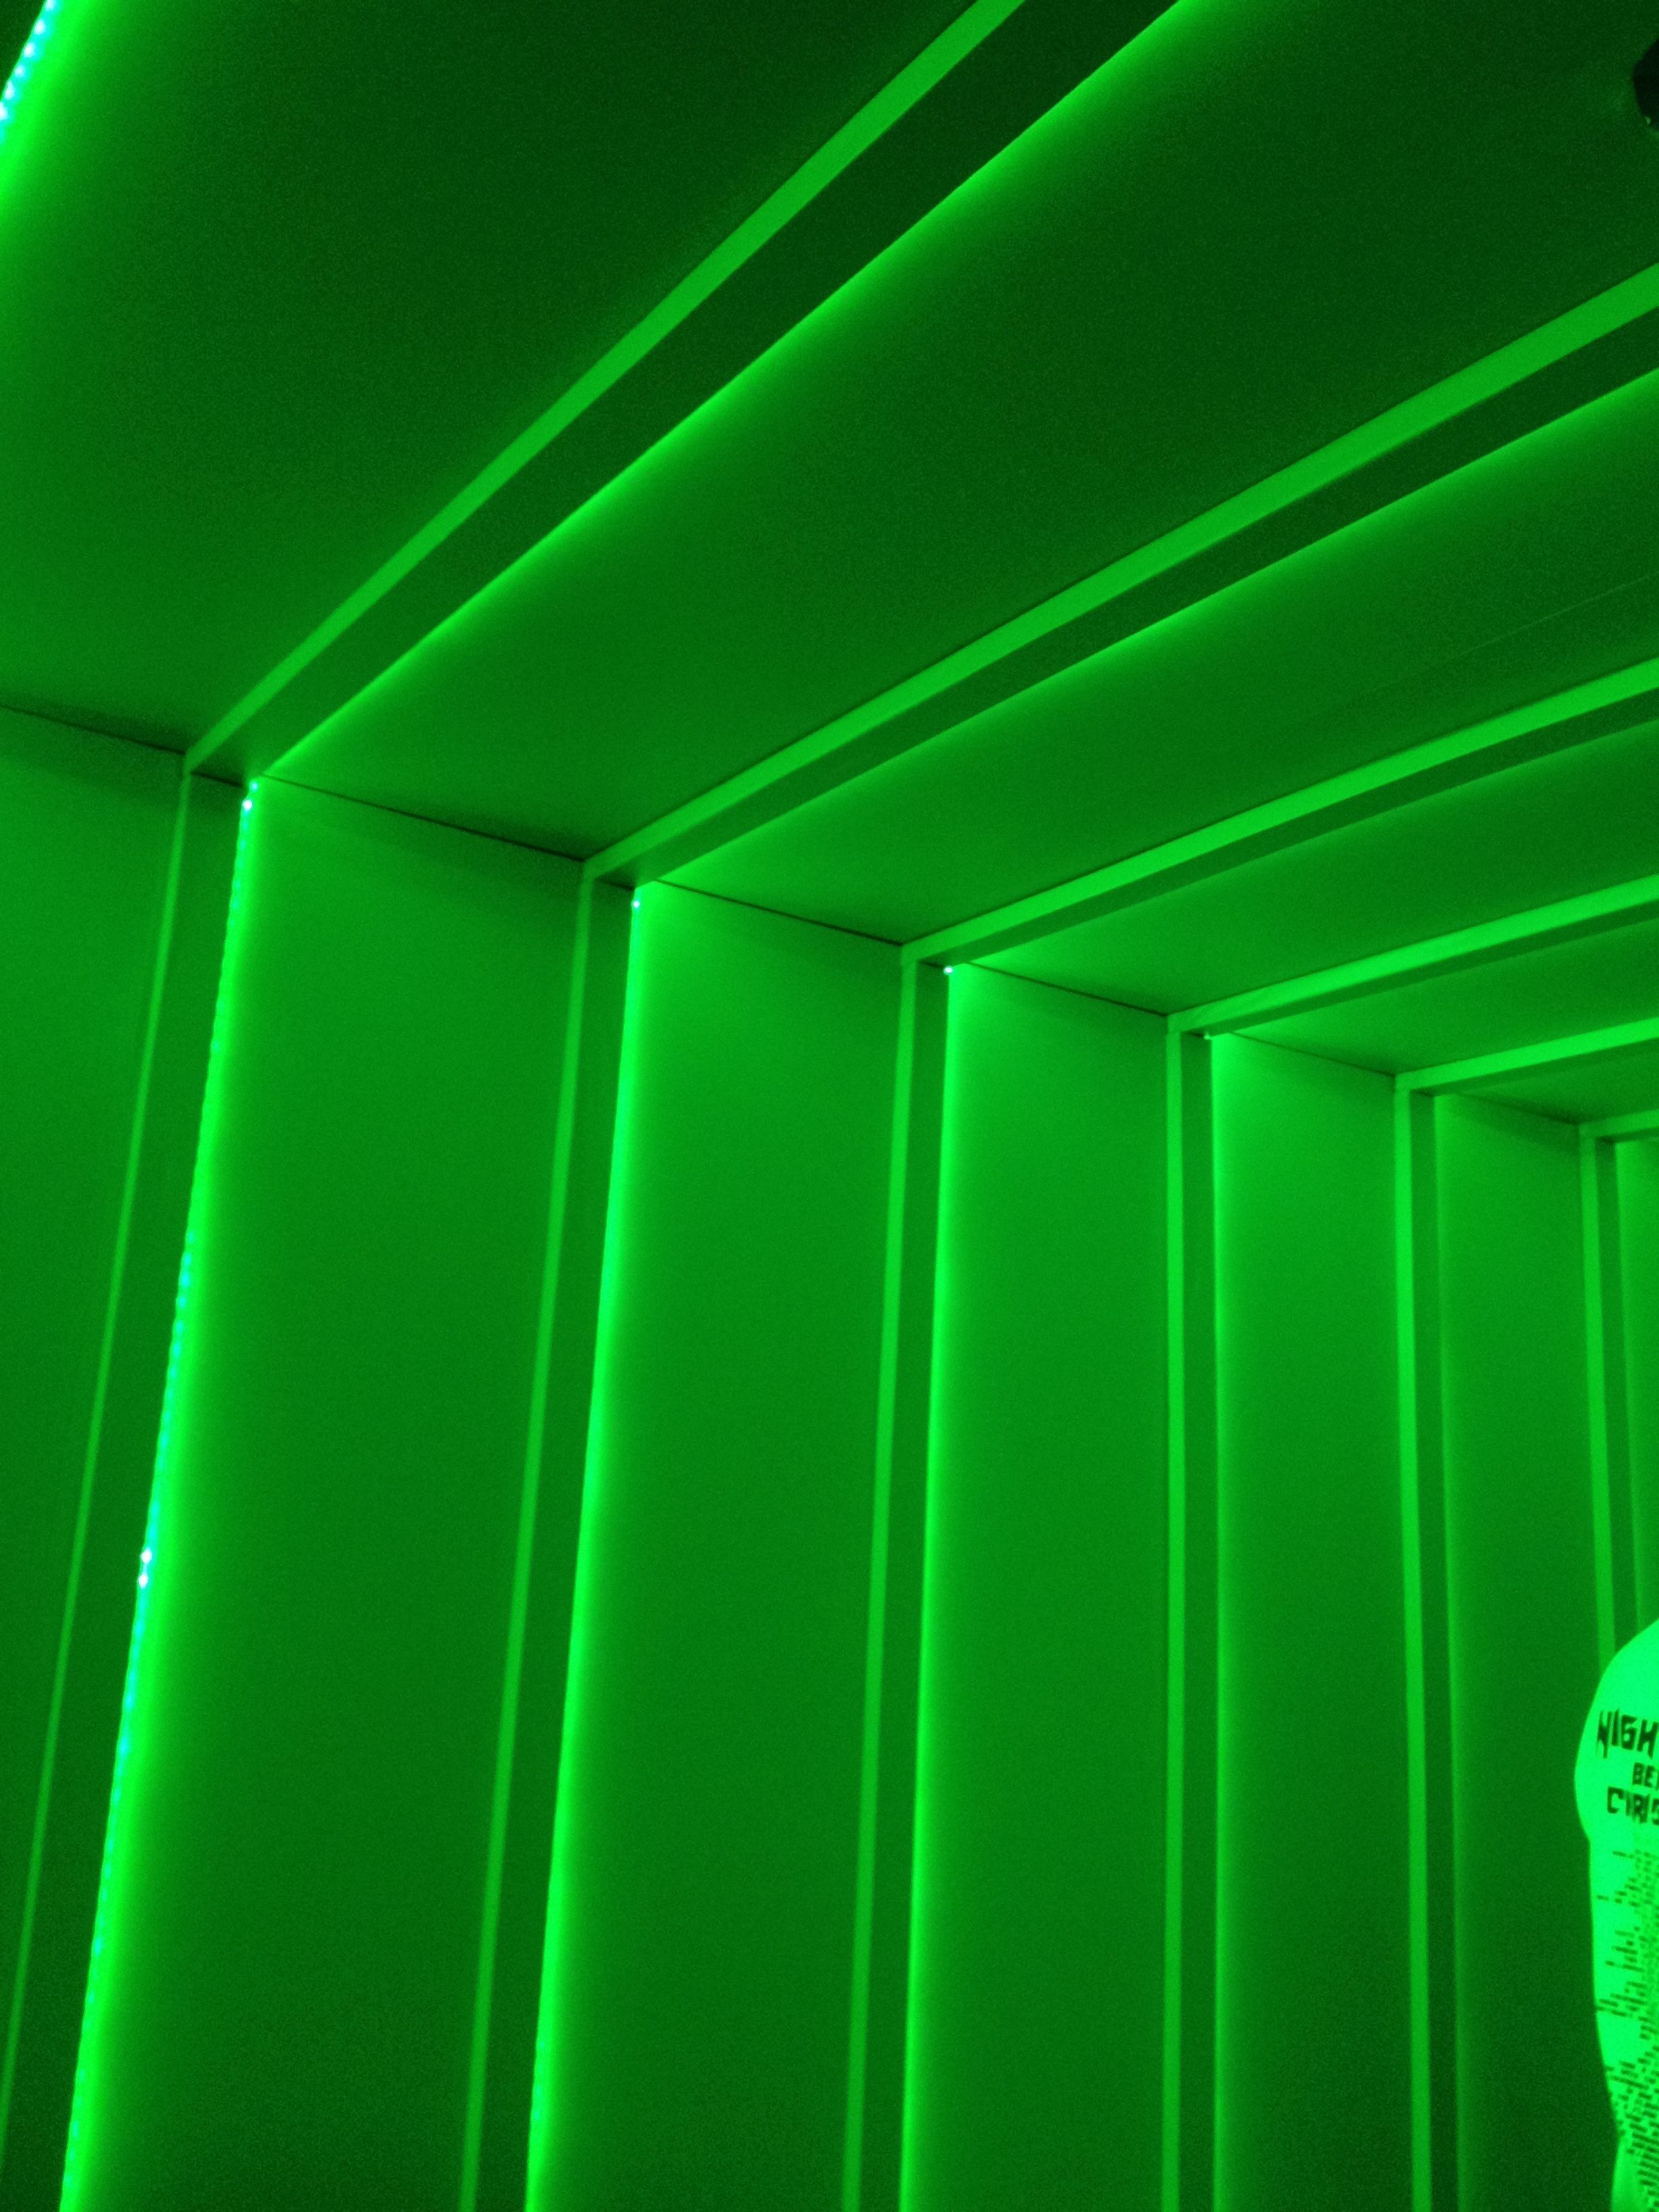 A green-lit wall with ridges and a person's arm in the corner. - Neon green